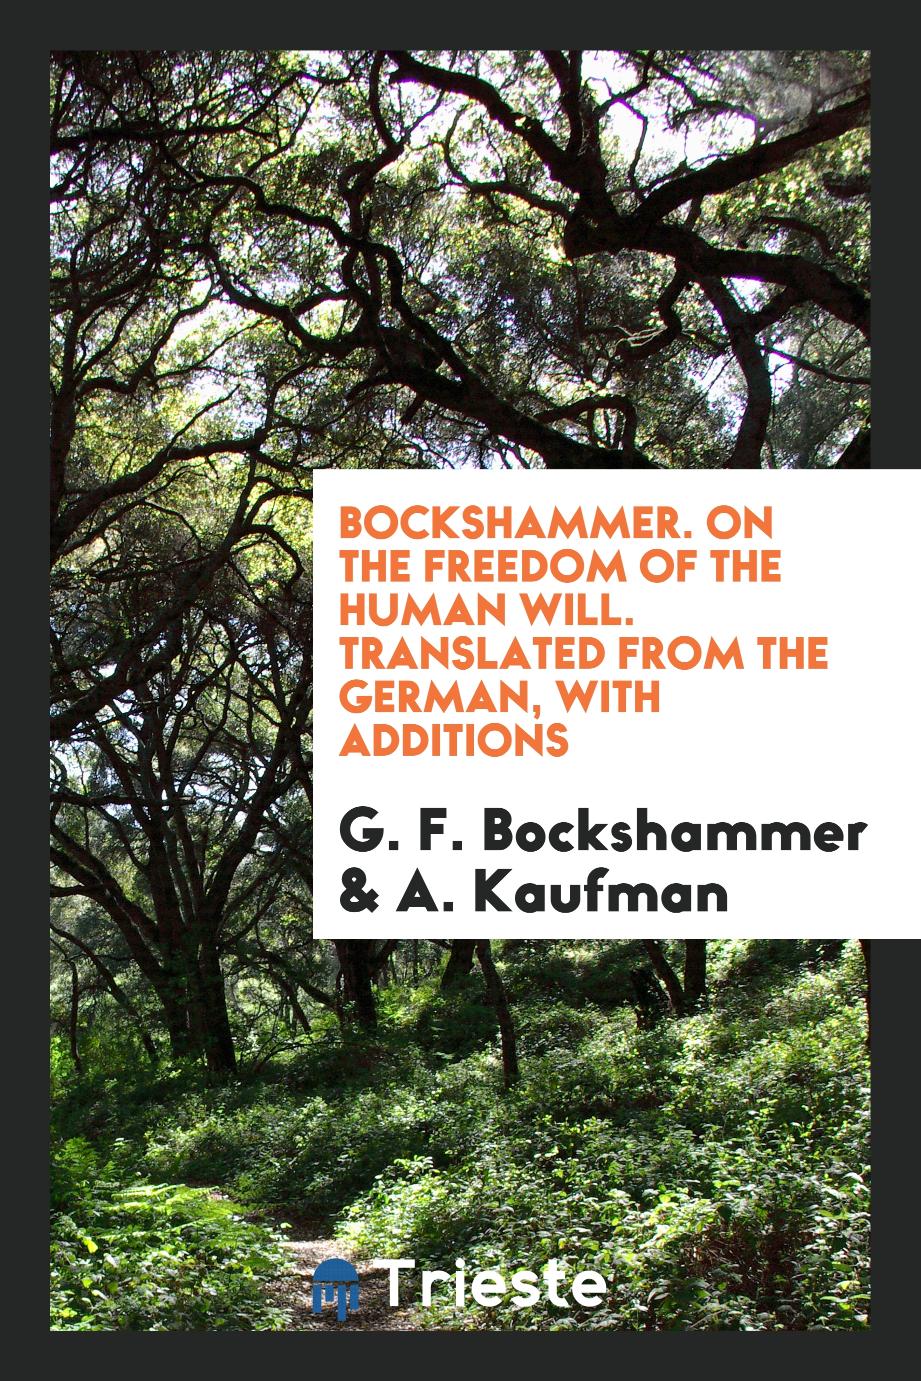 Bockshammer. On the Freedom of the Human Will. Translated from the German, with Additions